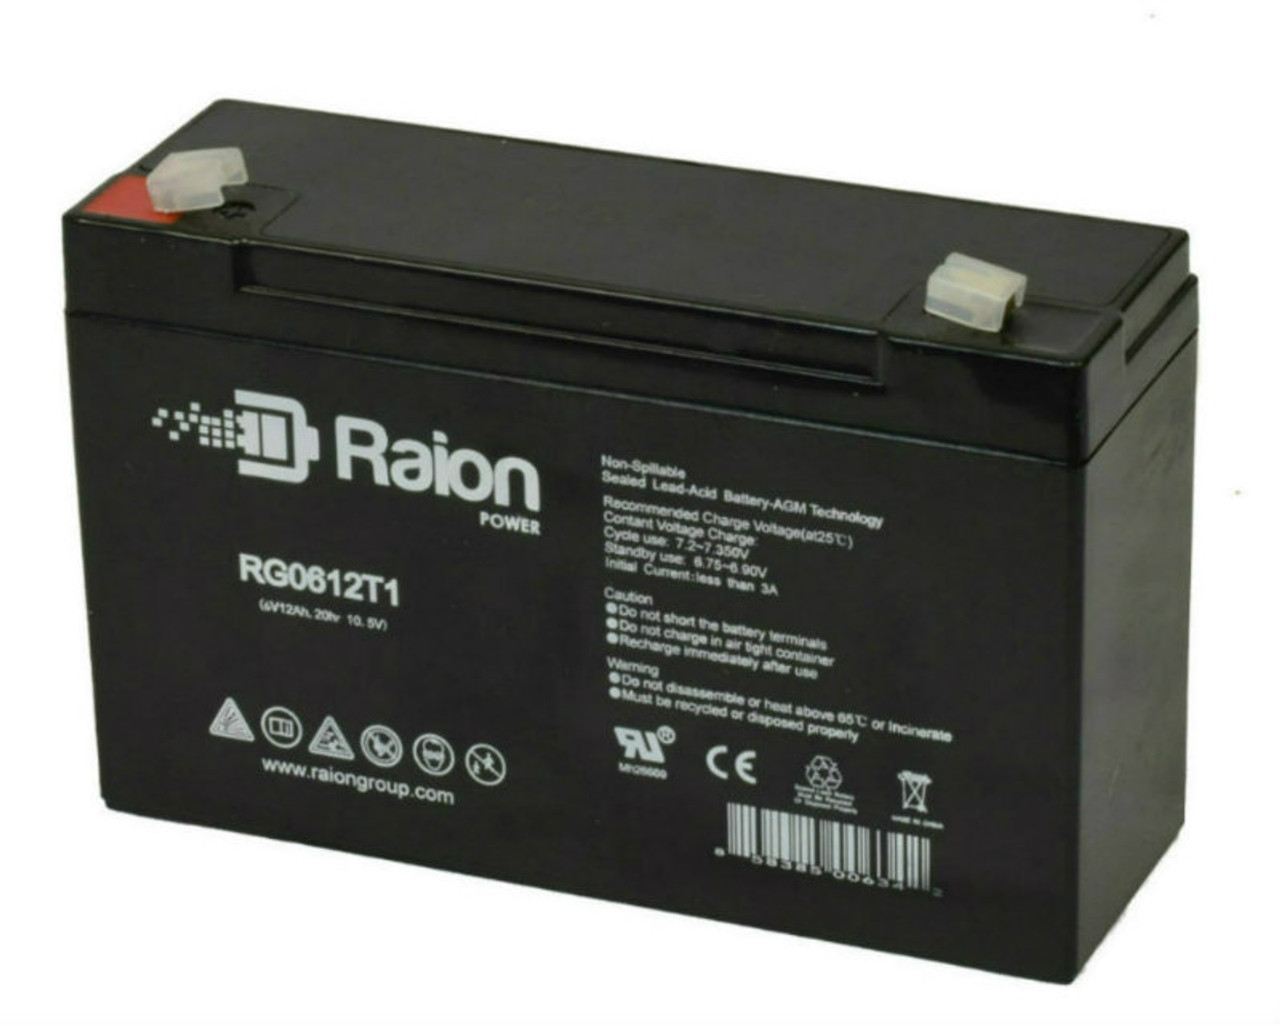 Raion Power RG06120T1 Replacement Battery for Raythunder NP12-6